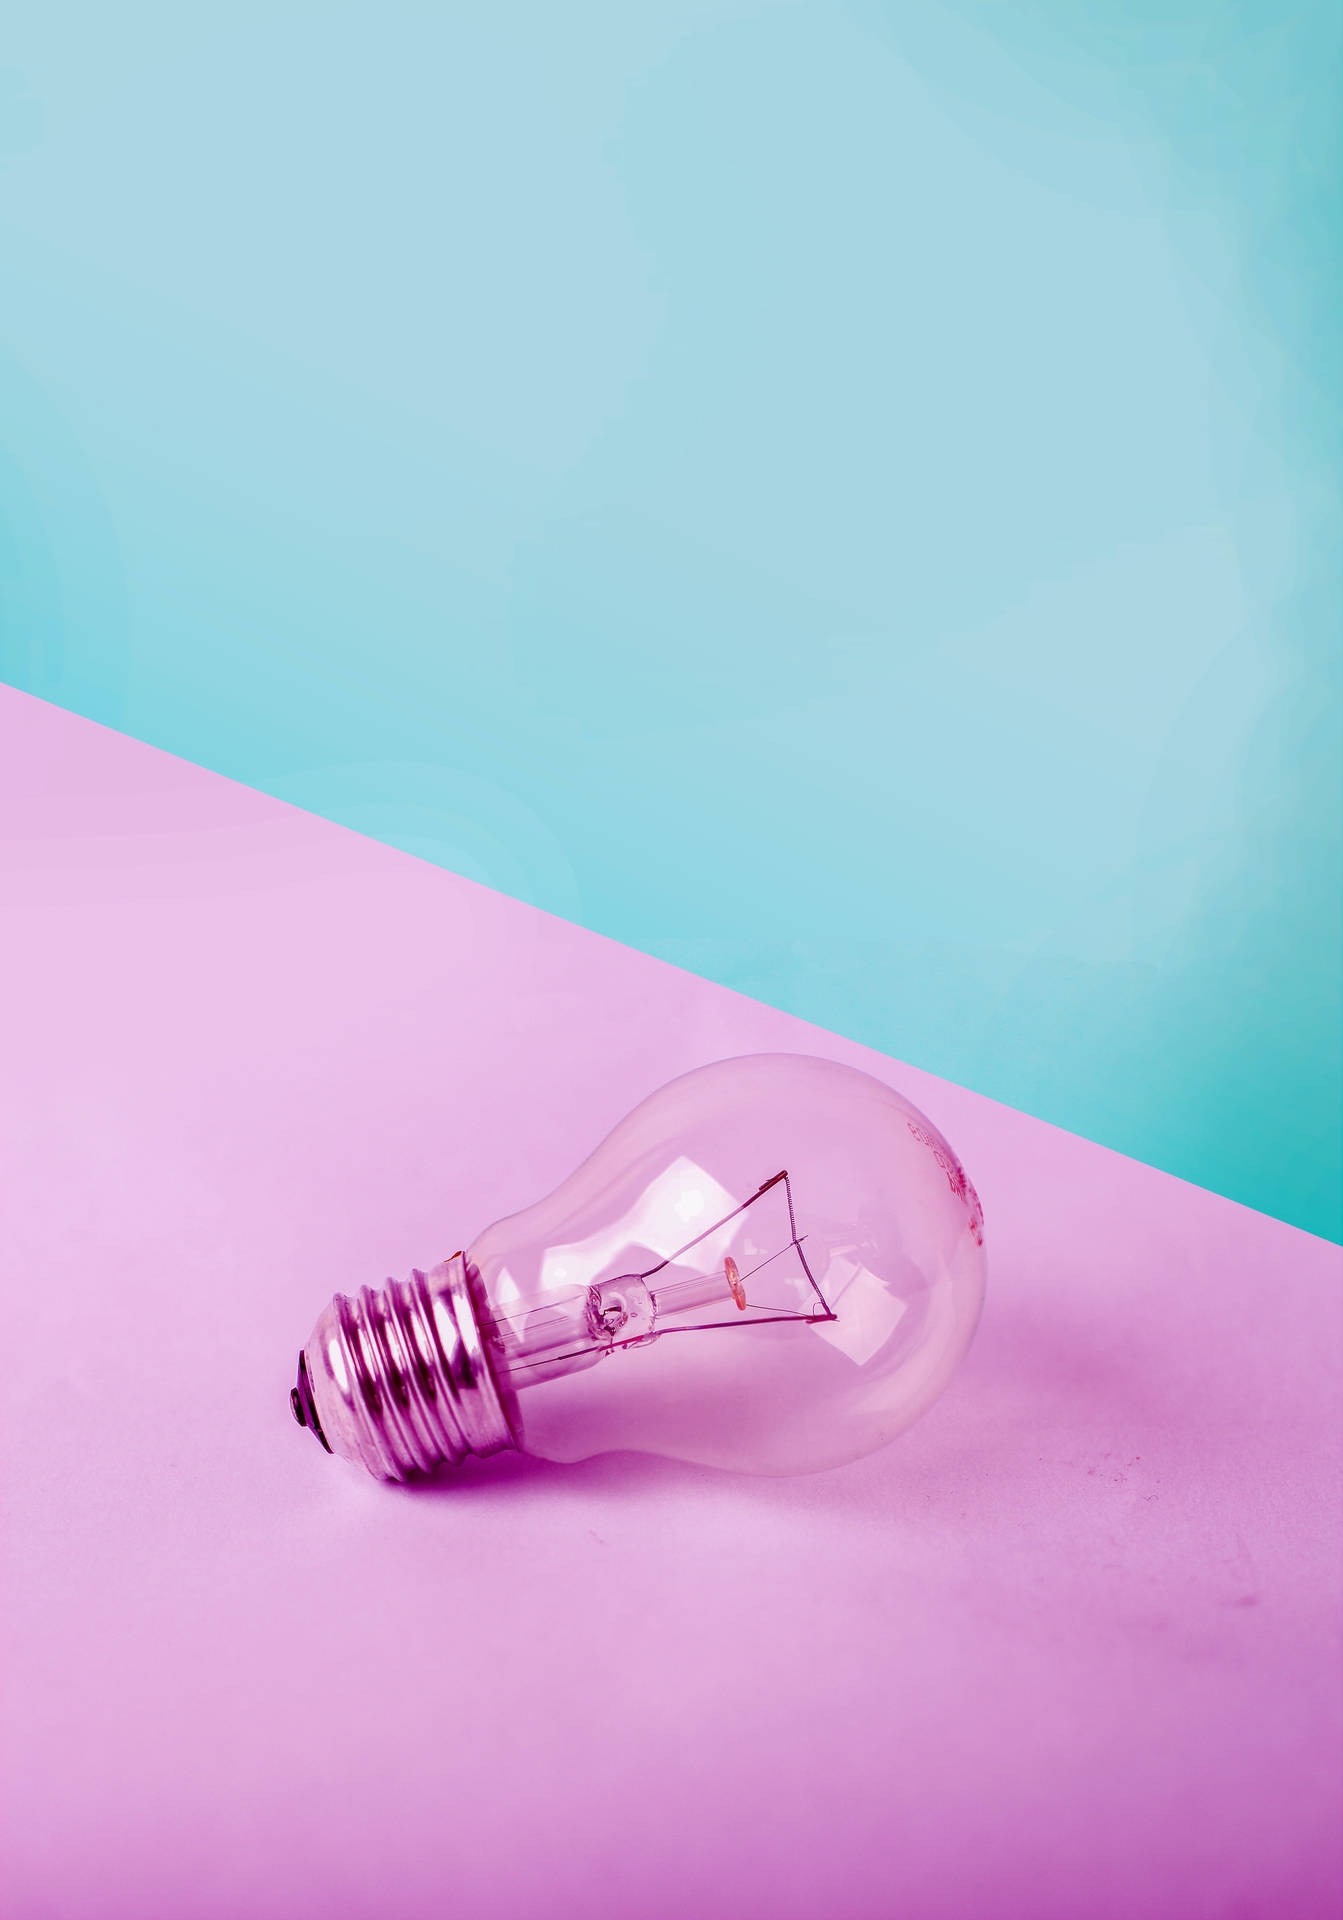 Harmony of Pastel Colors Holding a Bright Idea Wallpaper